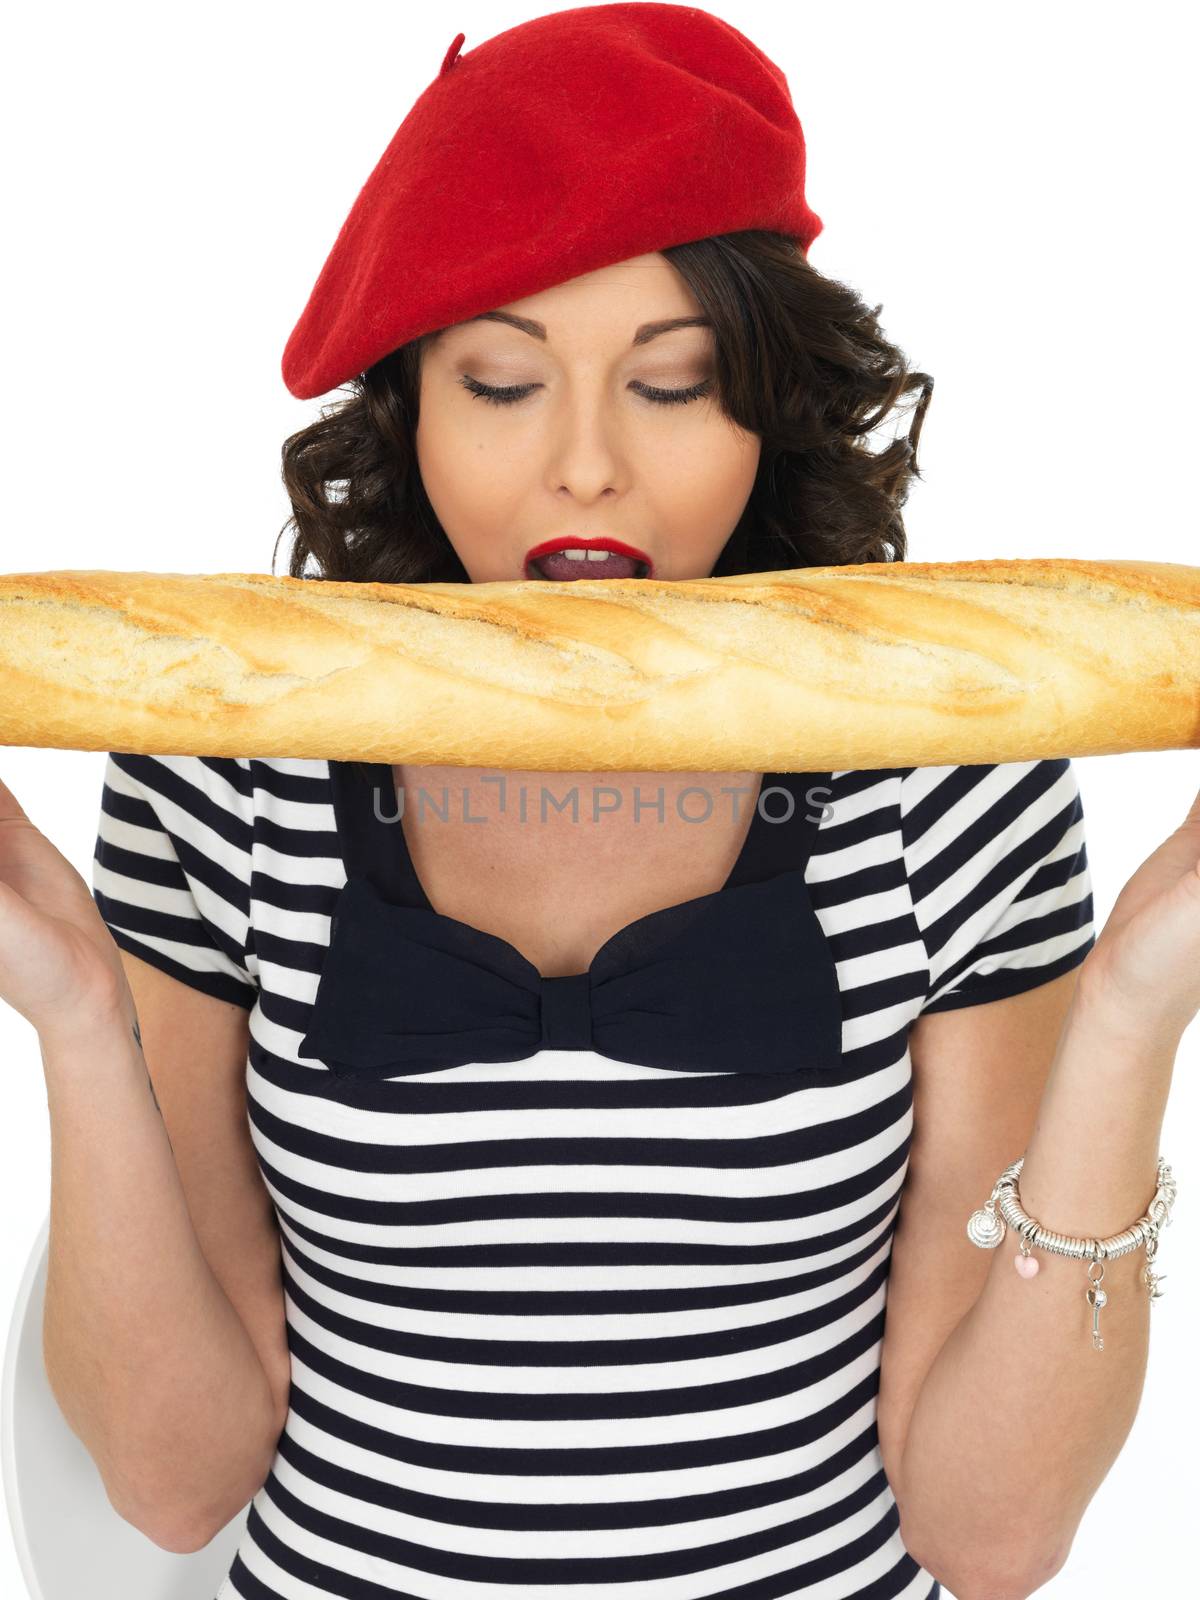 Attractive Happy Young Woman Eating a French Stick Bread Loaf